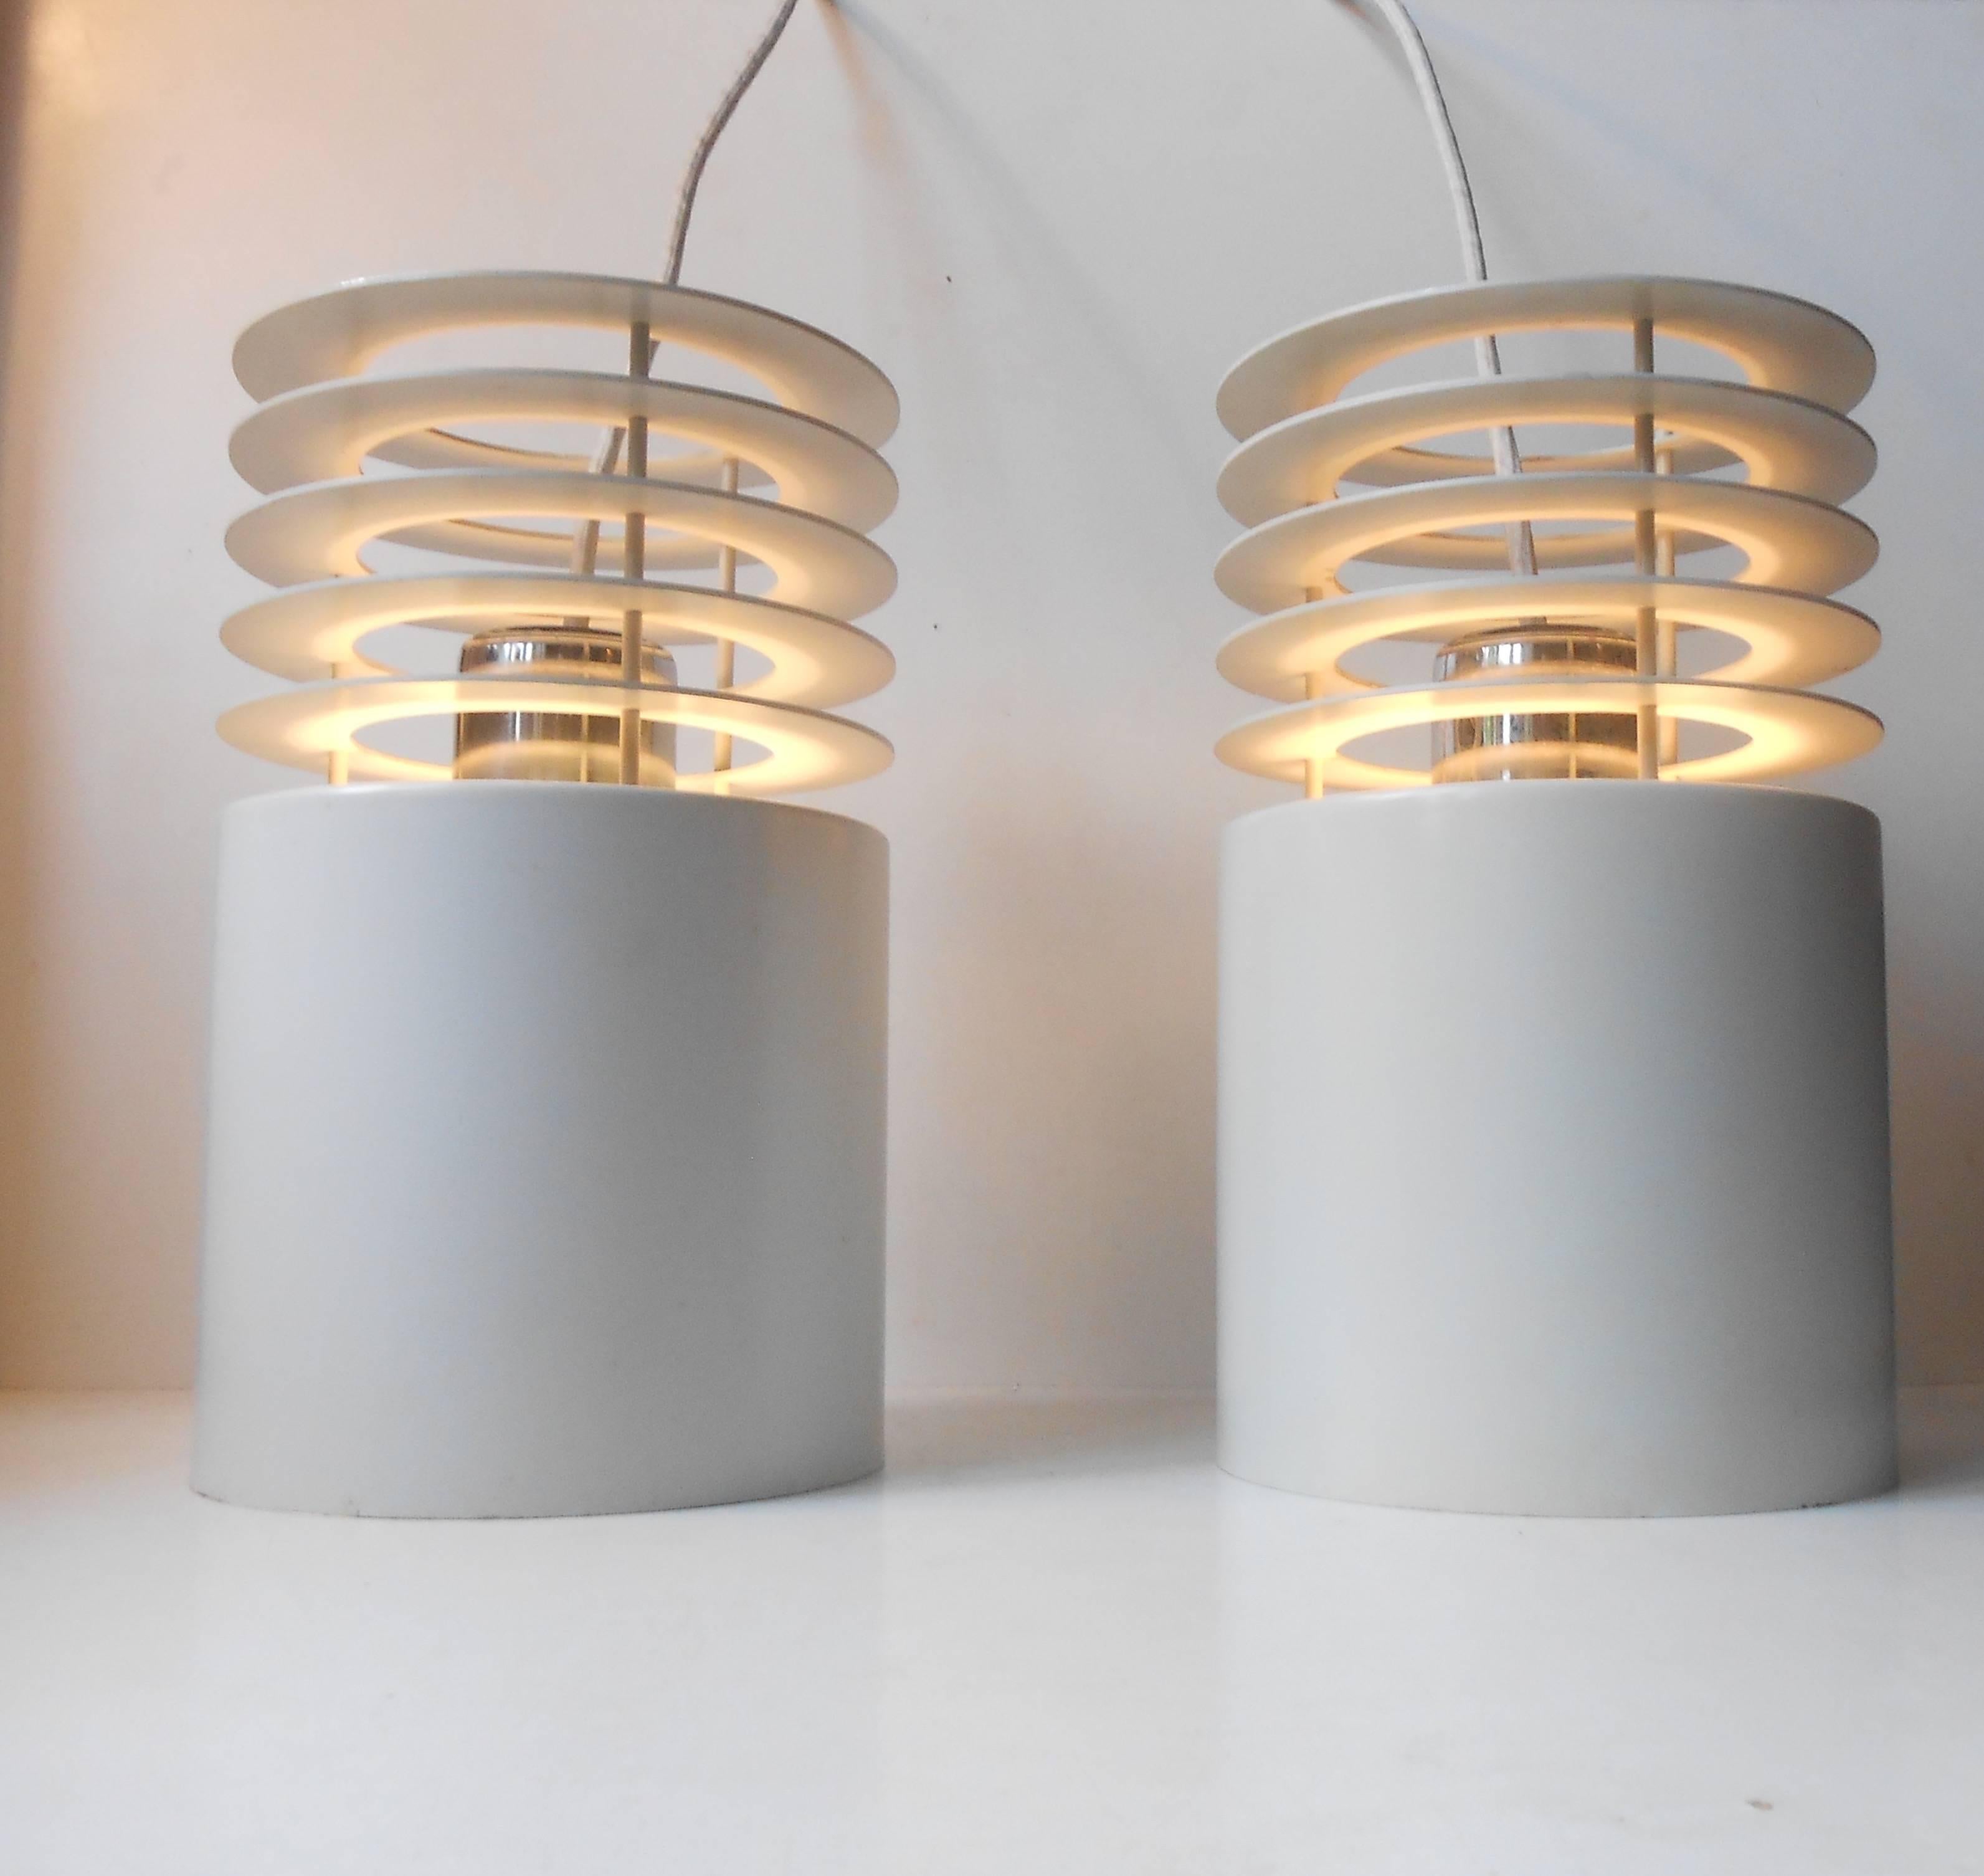 Matching pair of 'Hydra 1' pendant lamps designed by Jo Hammerborg and manufactured by the Danish Company Fog & Mørup in the 1970s. These have been hanging together and show similar ware and light patina. Measurements: H: 13 inches (33 cm), D: 6.8